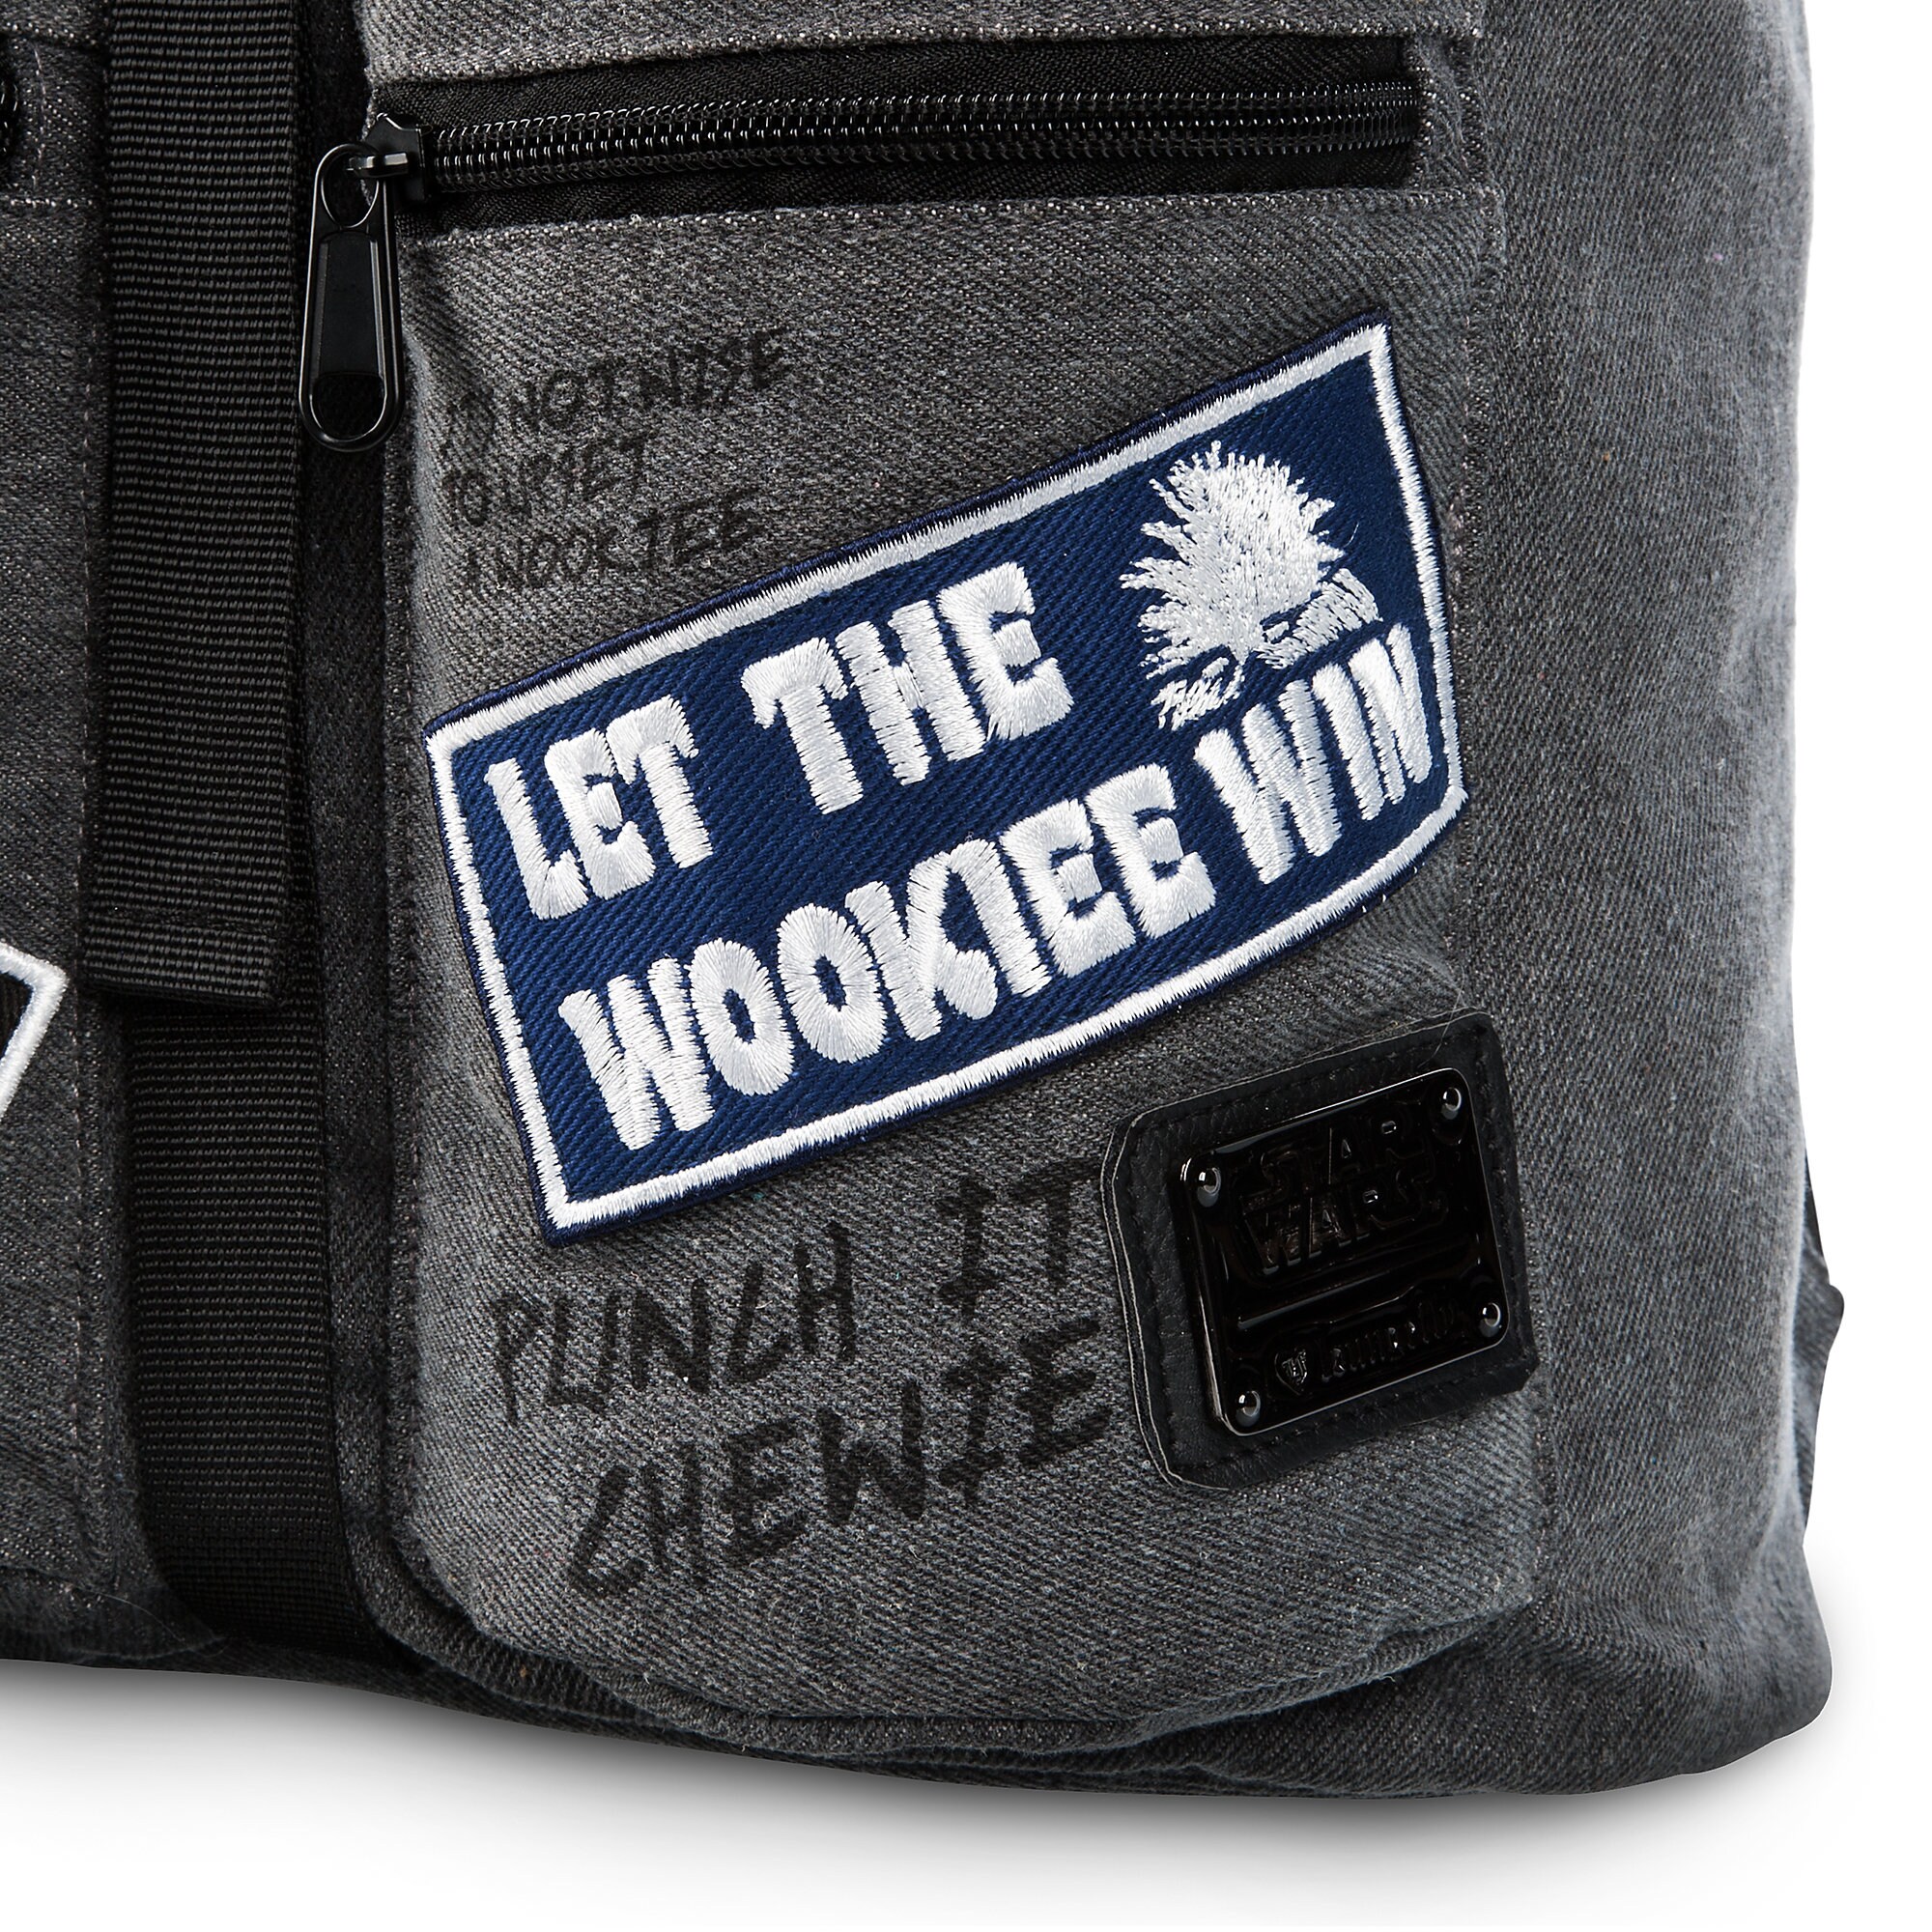 Star Wars Wookiee Backpack by Loungefly